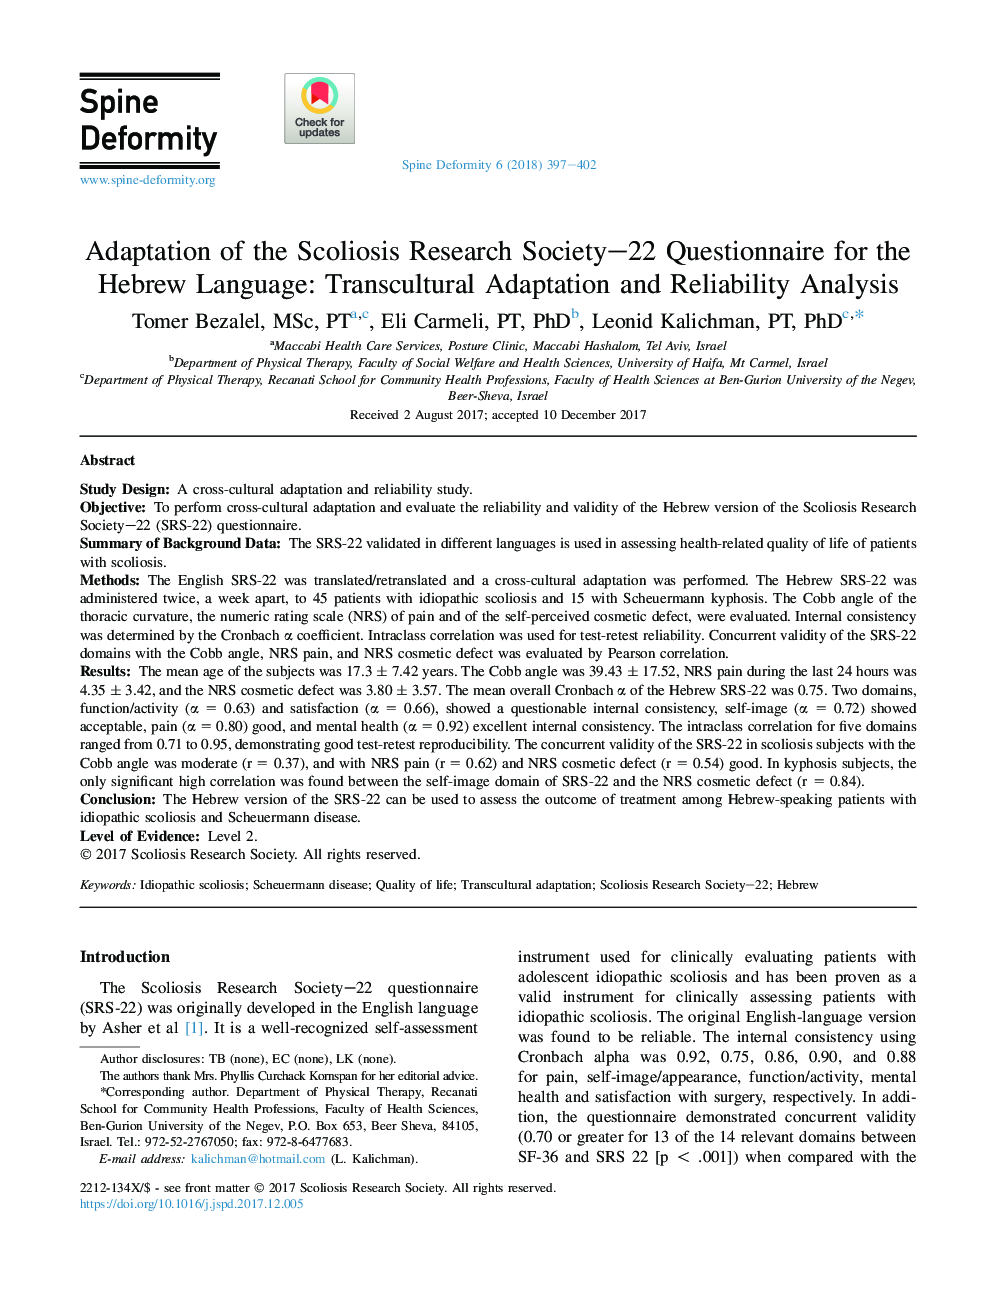 Adaptation of the Scoliosis Research Society-22 Questionnaire for the Hebrew Language: Transcultural Adaptation and Reliability Analysis